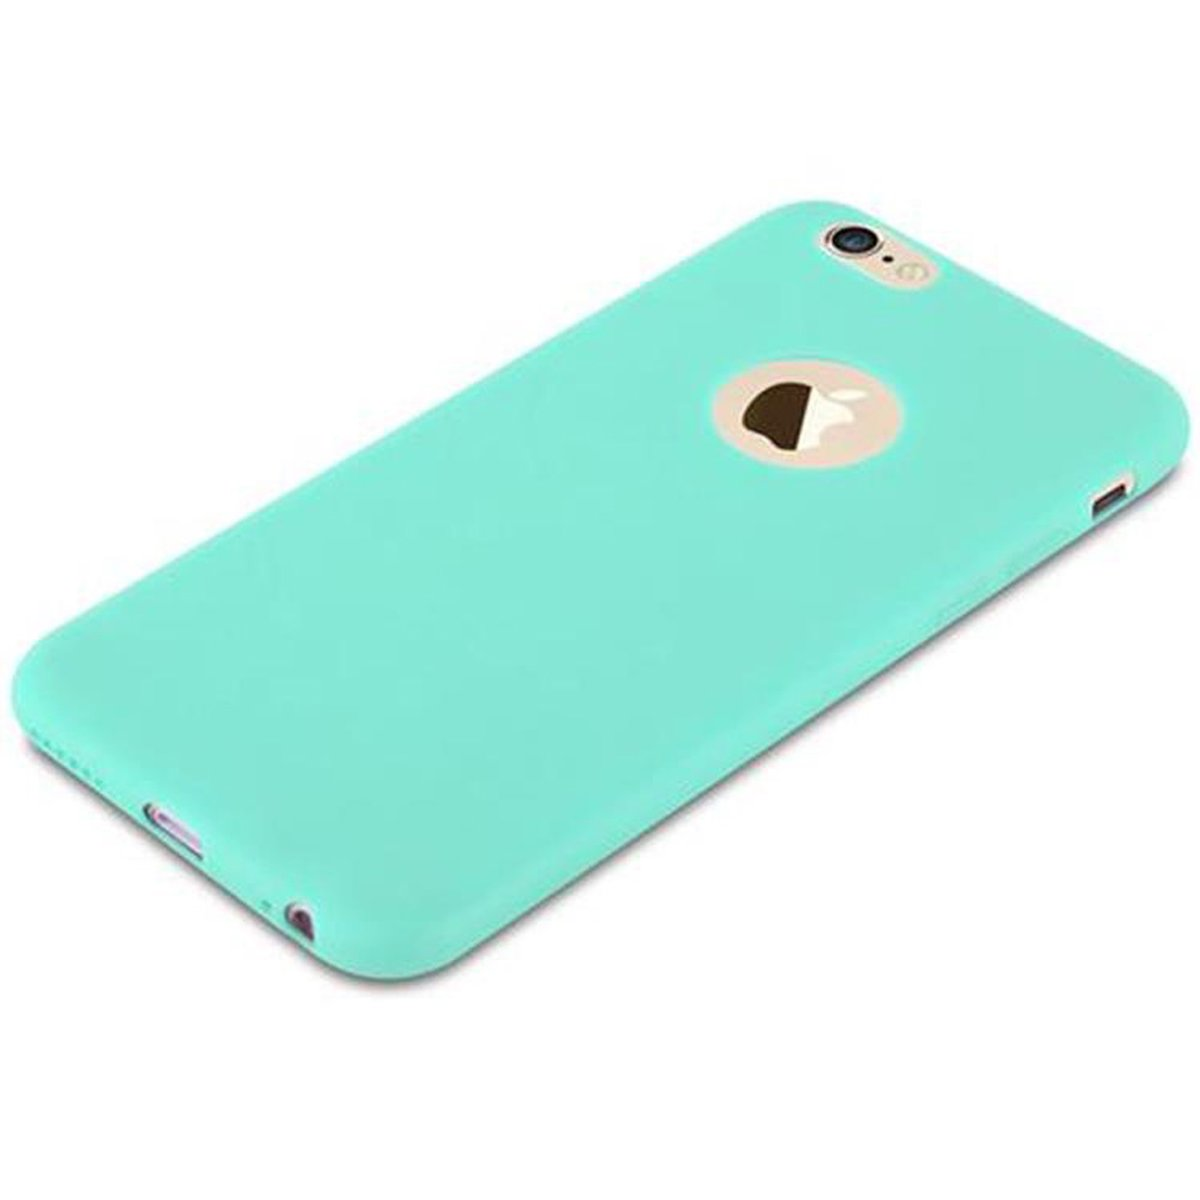 CADORABO Hülle im 6S, Backcover, Style, Candy CANDY BLAU / 6 iPhone Apple, TPU